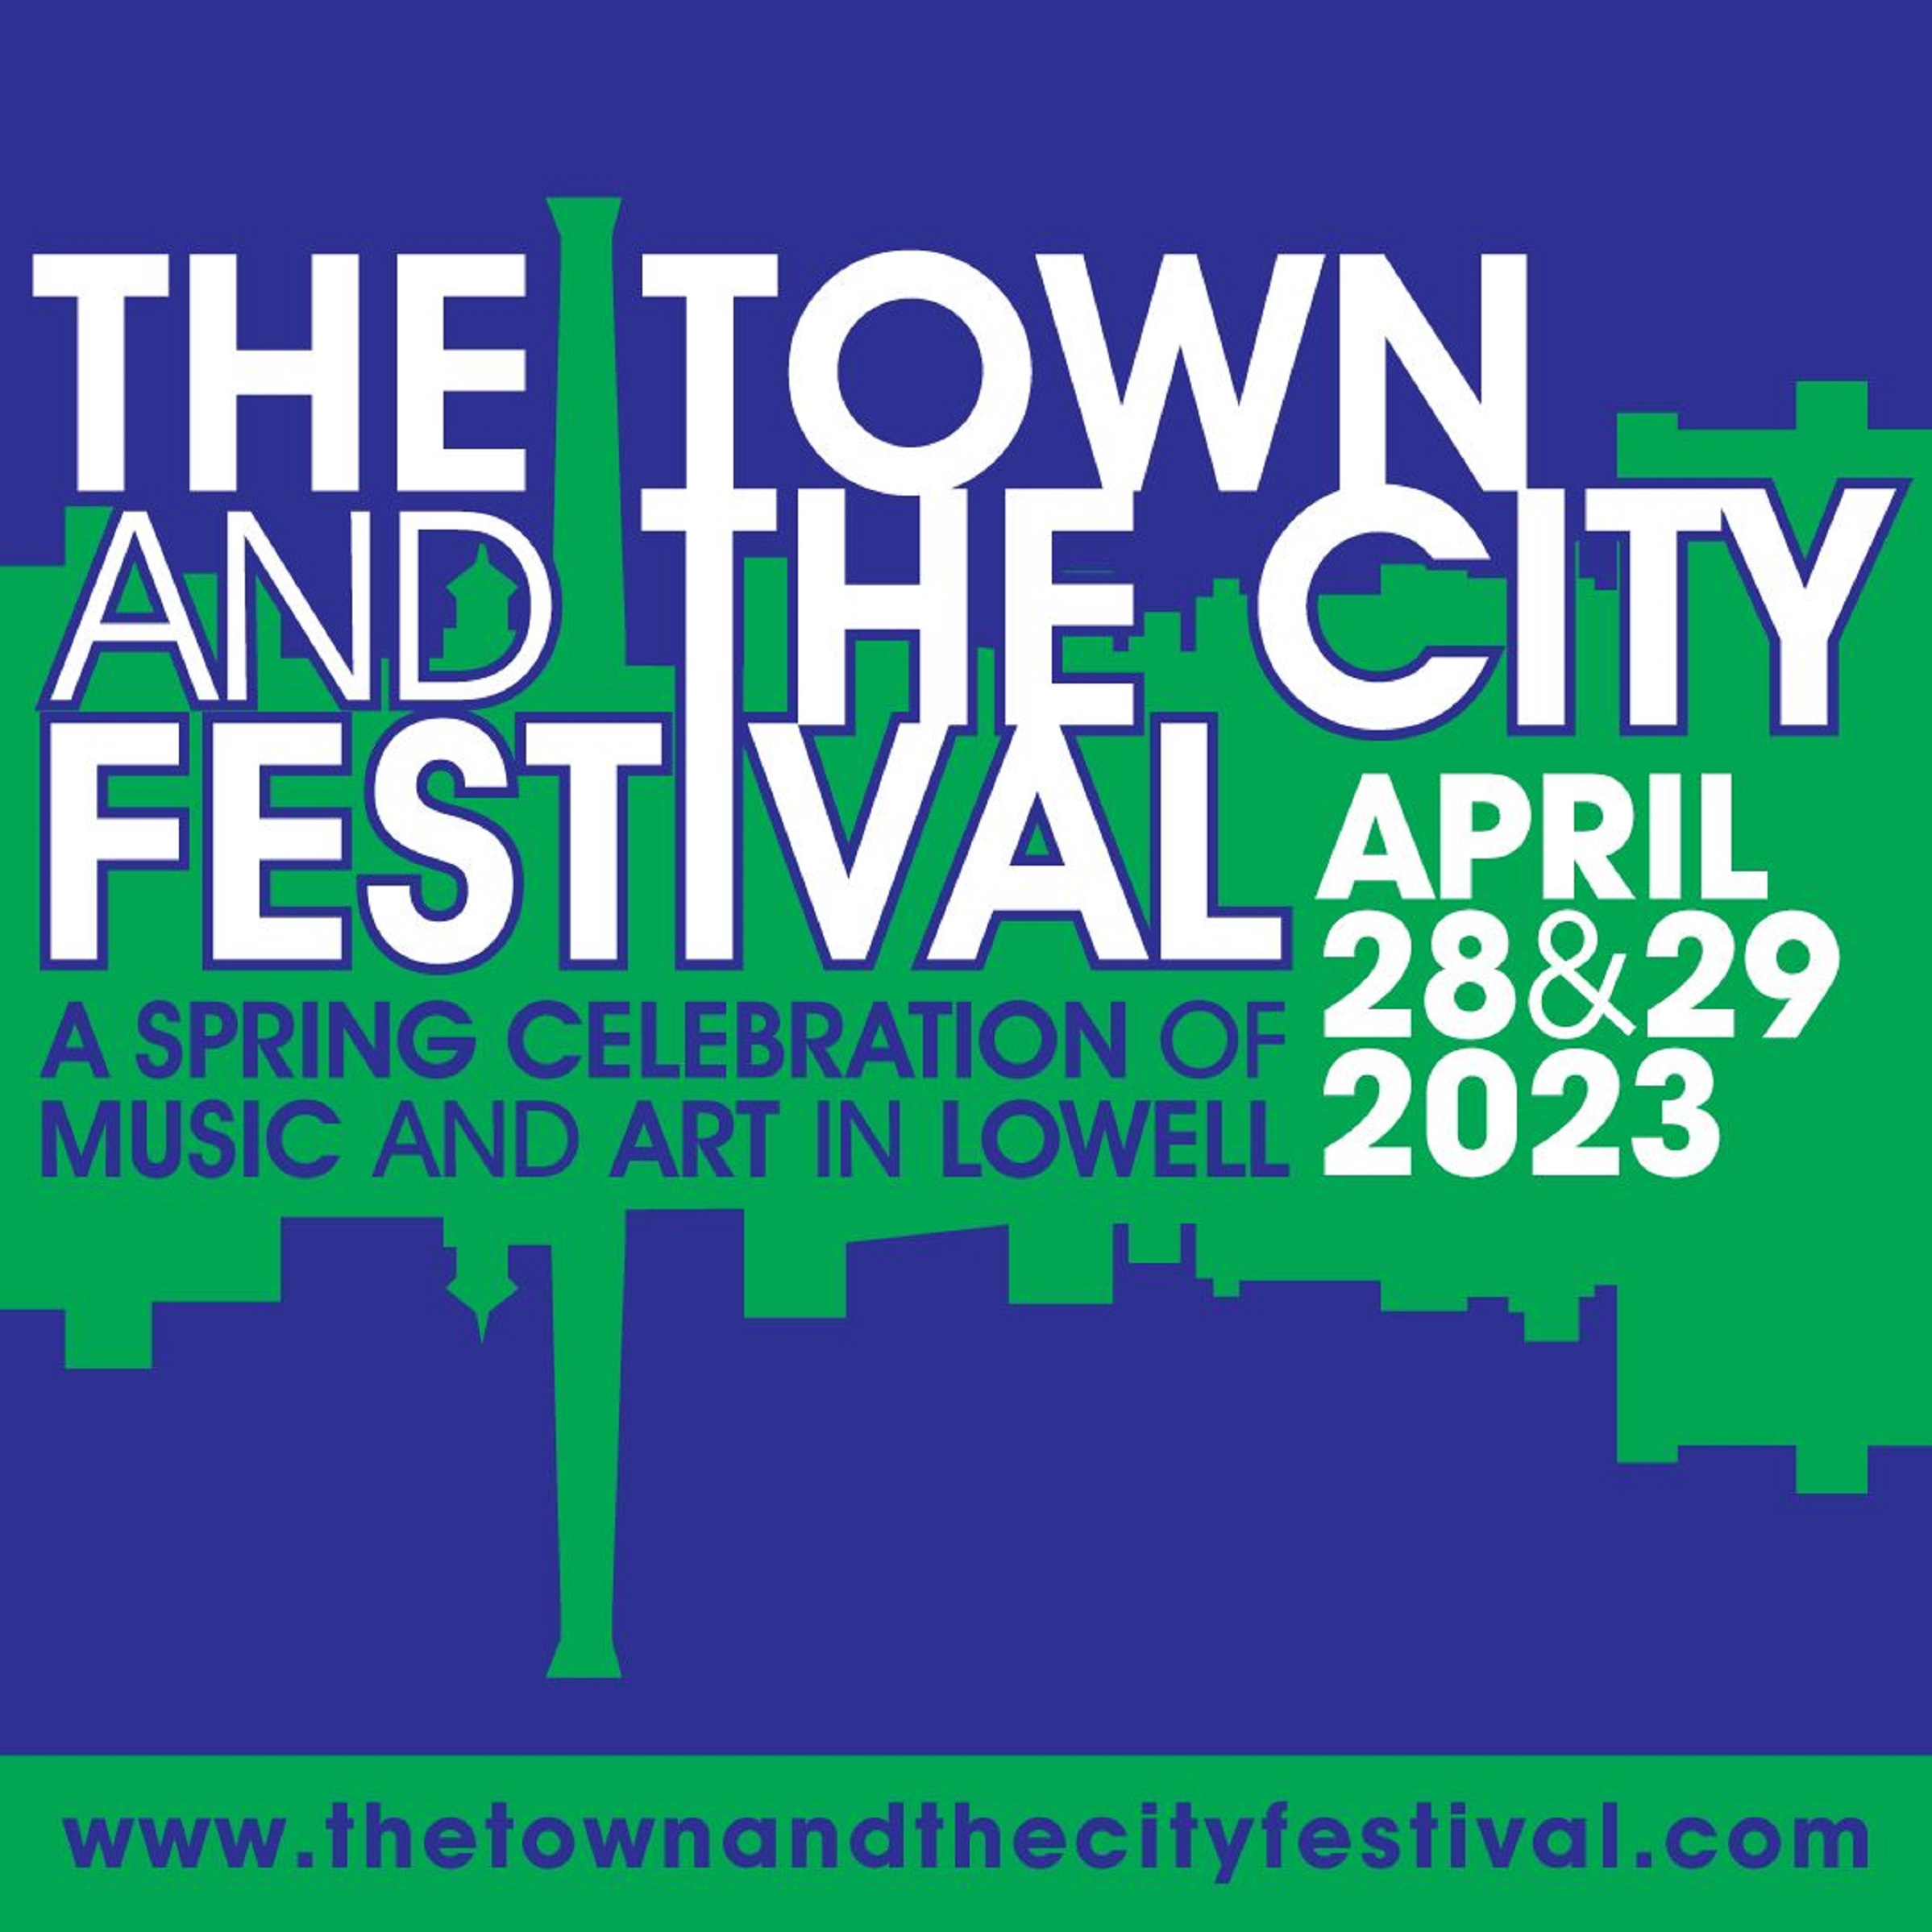 Initial artists announced for The Town and the City Festival April 28 and 29 in Lowell, MA